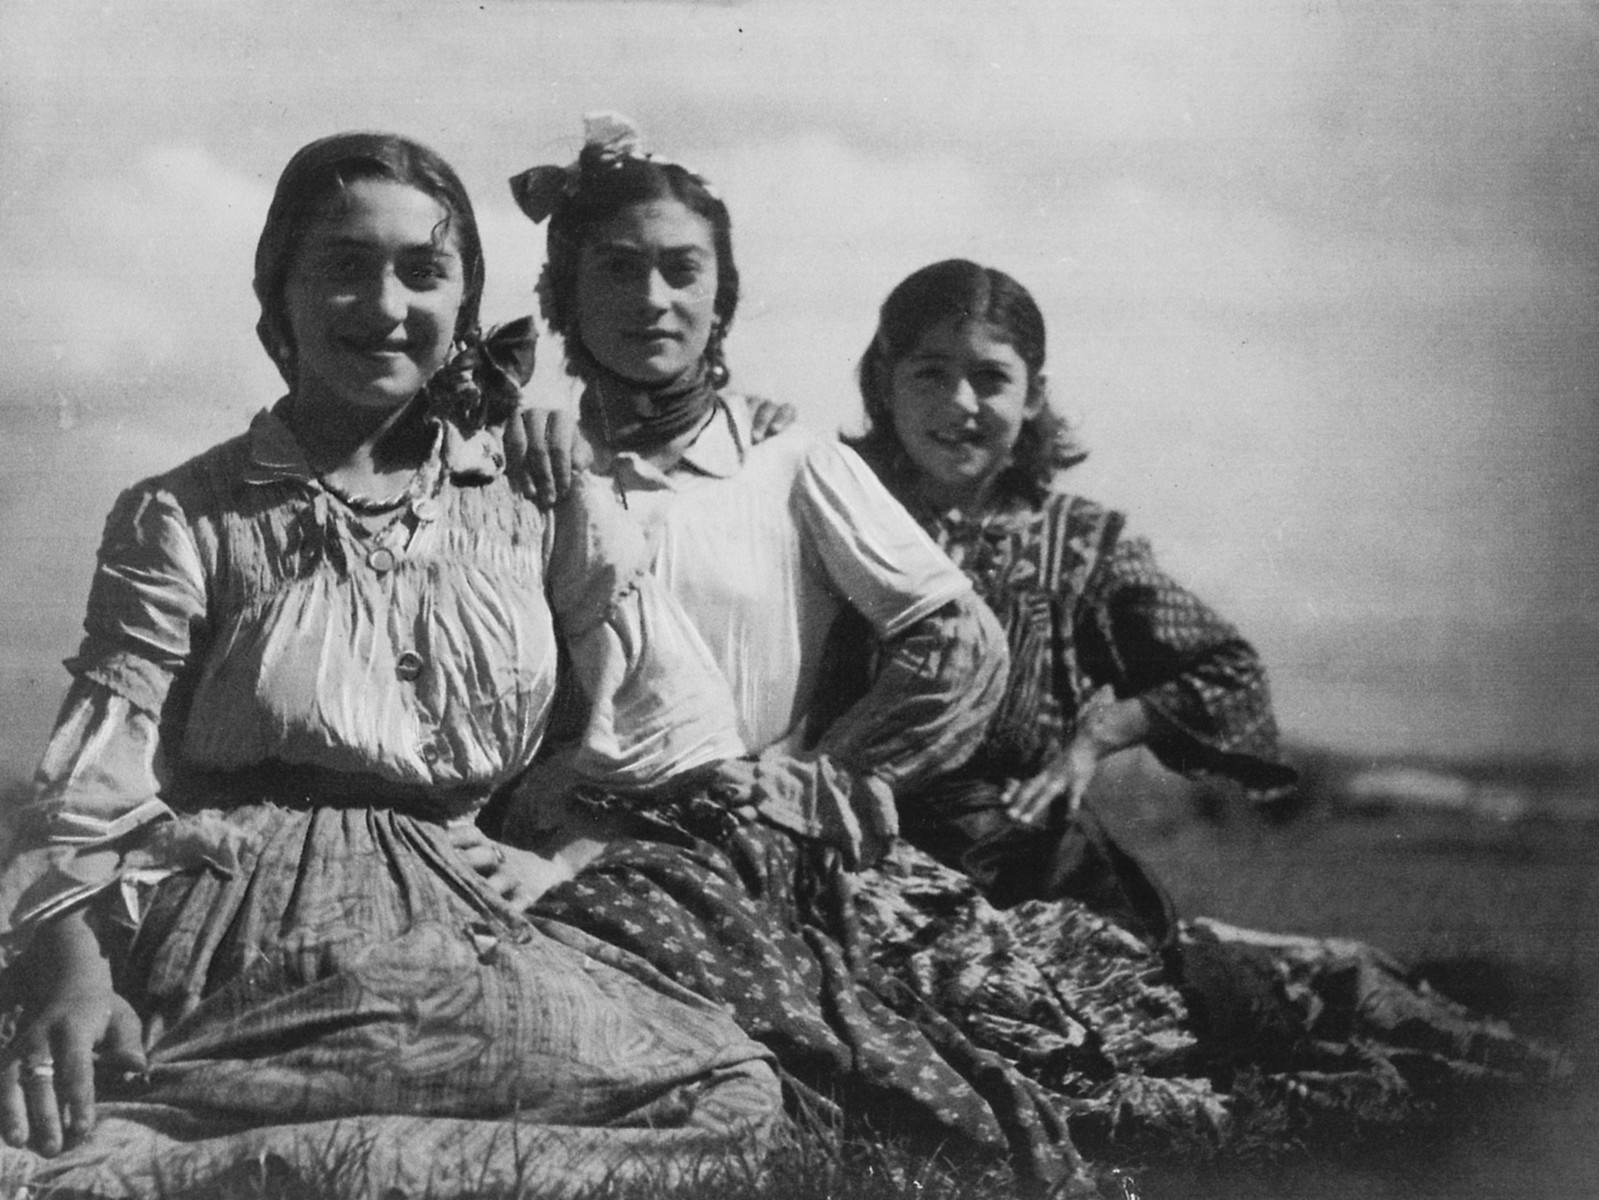 Portrait of three young Romani women.

The caption in "The Heroic Present" reads, "Europe, 1930s.  Women of Pulika's kumpania, including Rosa (left) and Sinza (right)."